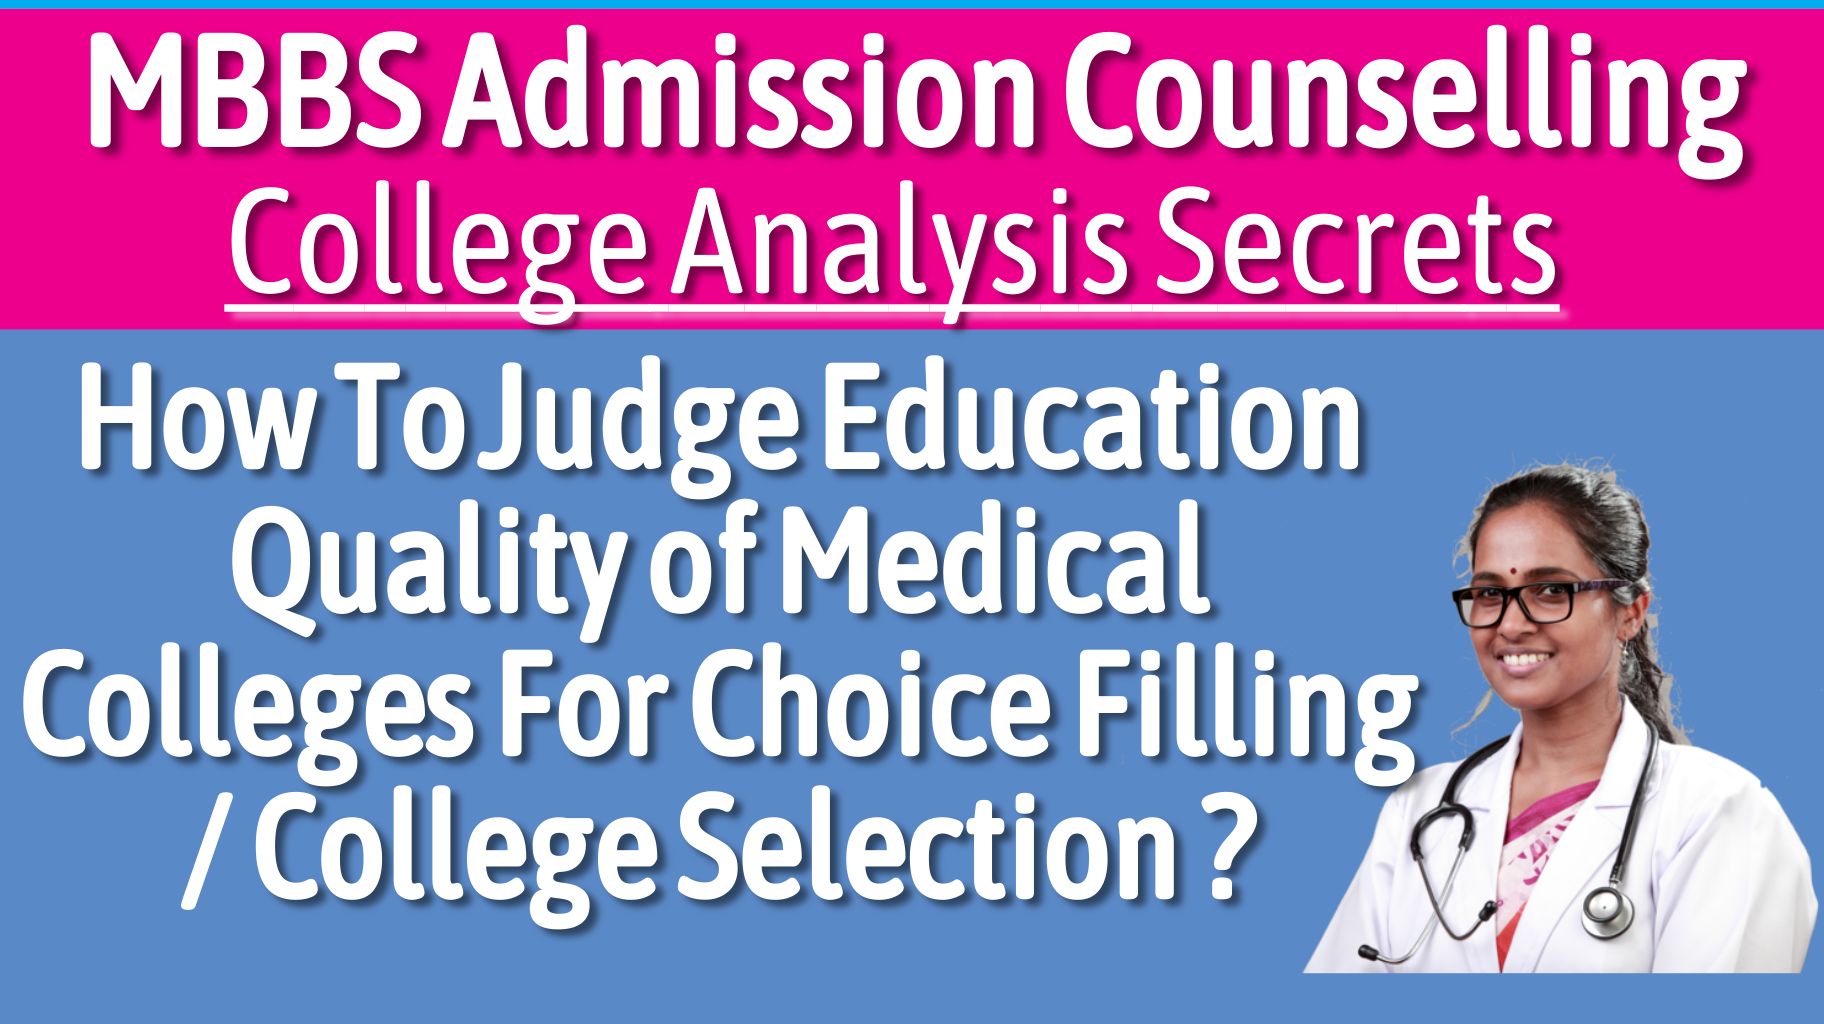 How to judge quality of medical college for choice filling or college selection